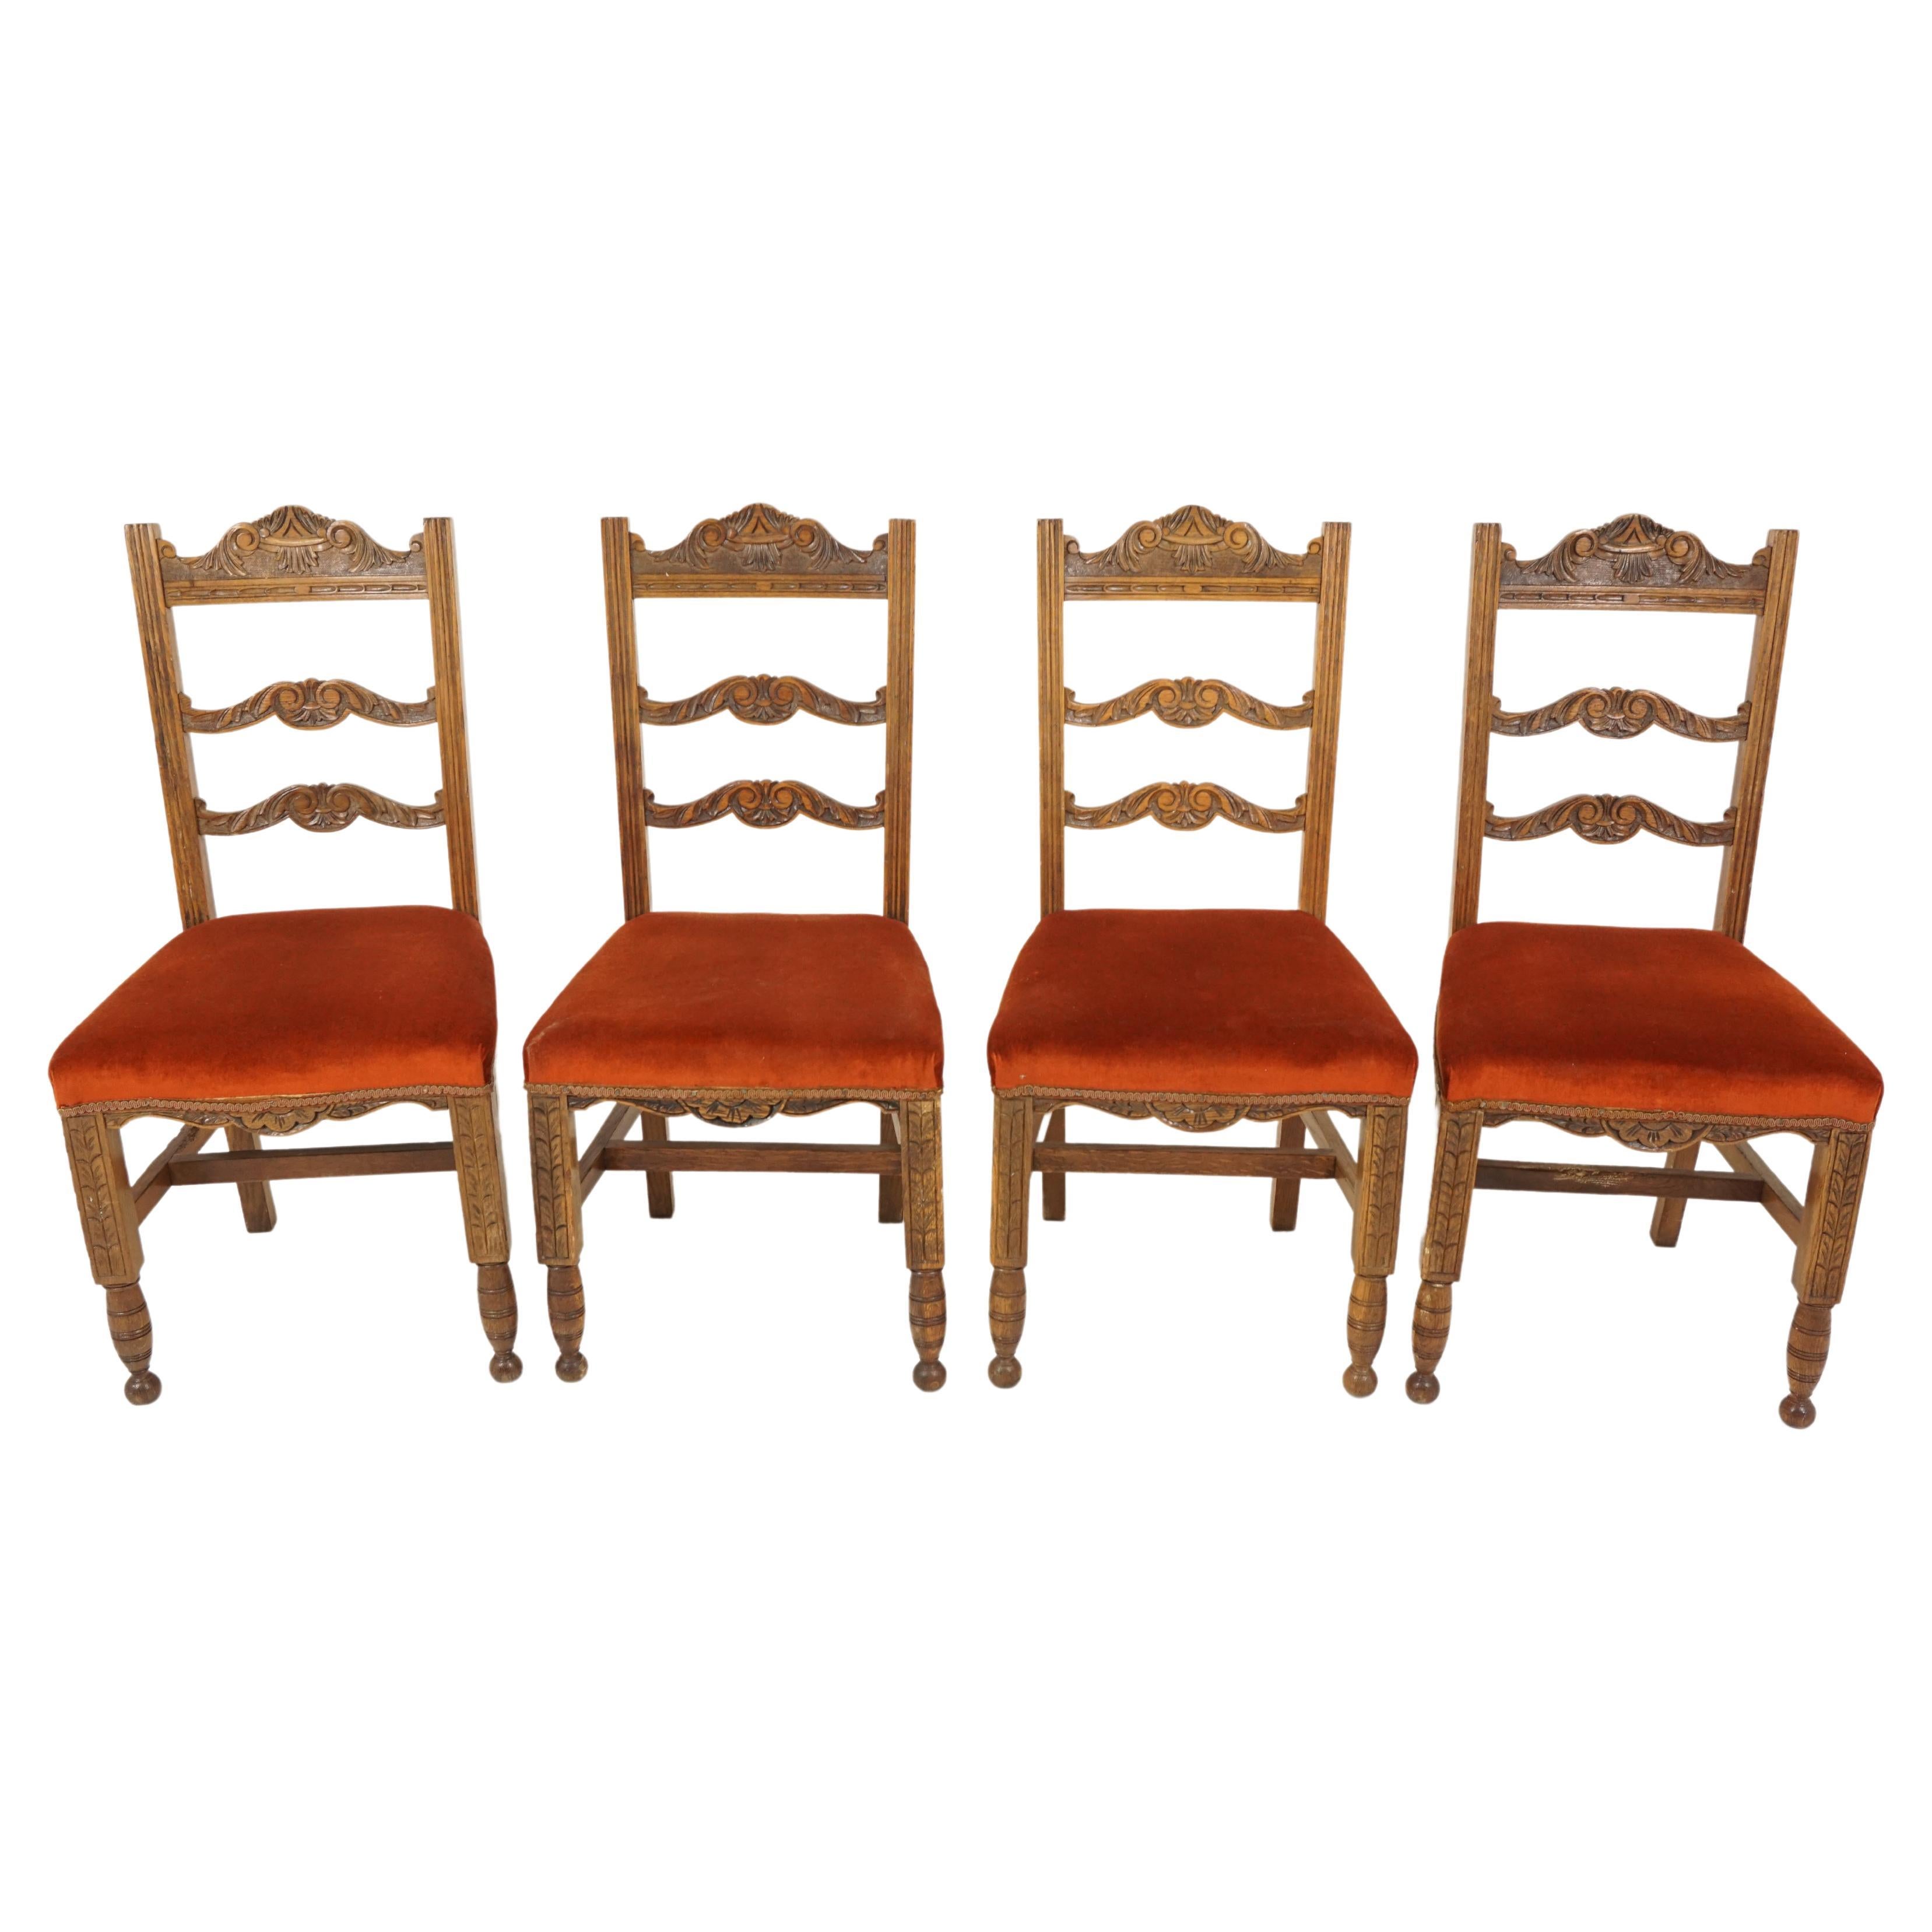 Four Carved Oak Dining Chairs, Upholstered Seats, Scotland, 1920